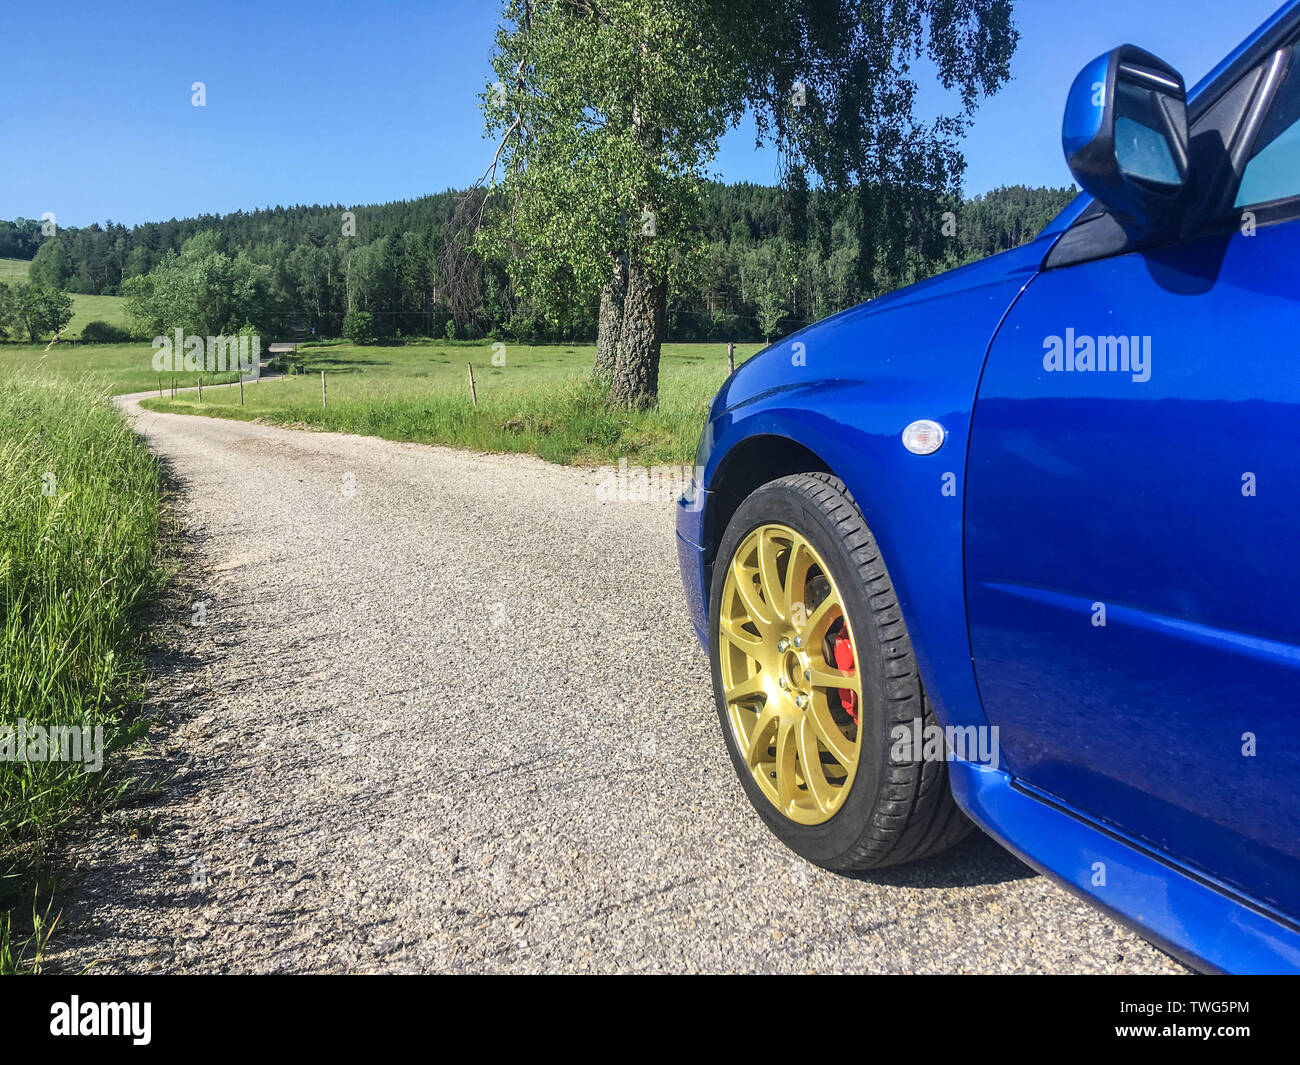 The blue youngtimer sports car with golden rims is standing on the narrow road and is ready to drive fast. Like being part of the rally. Stock Photo